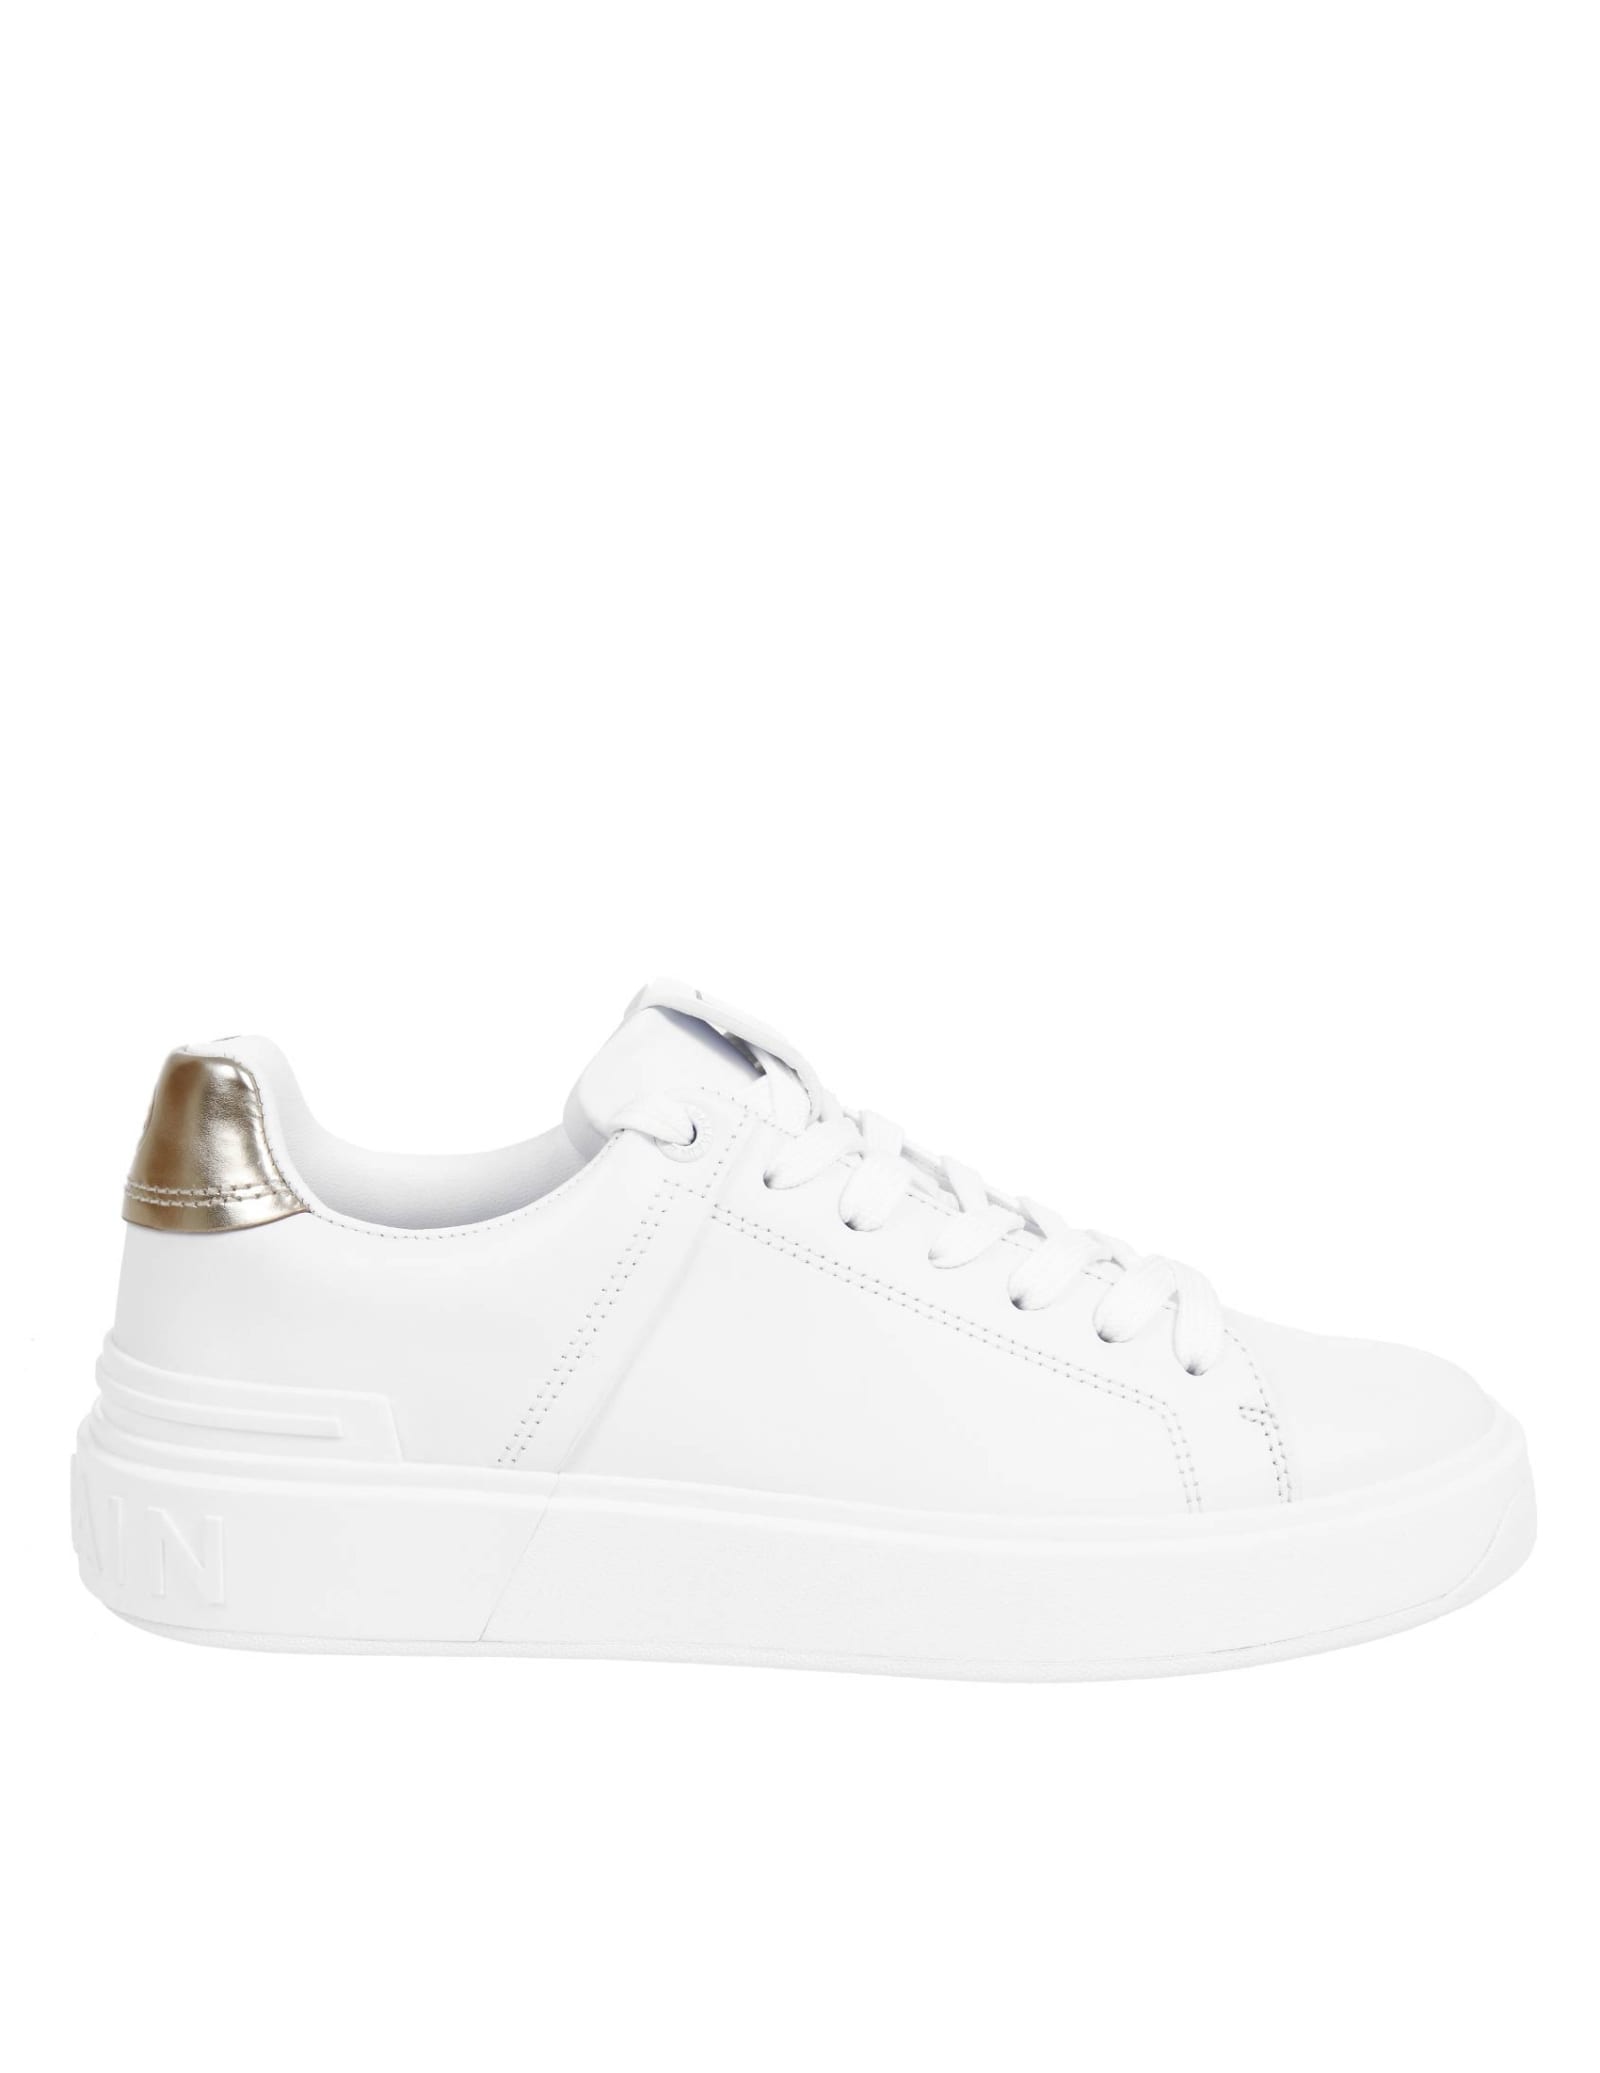 Balmain SNEAKERS B-COURT IN WHITE LEATHER